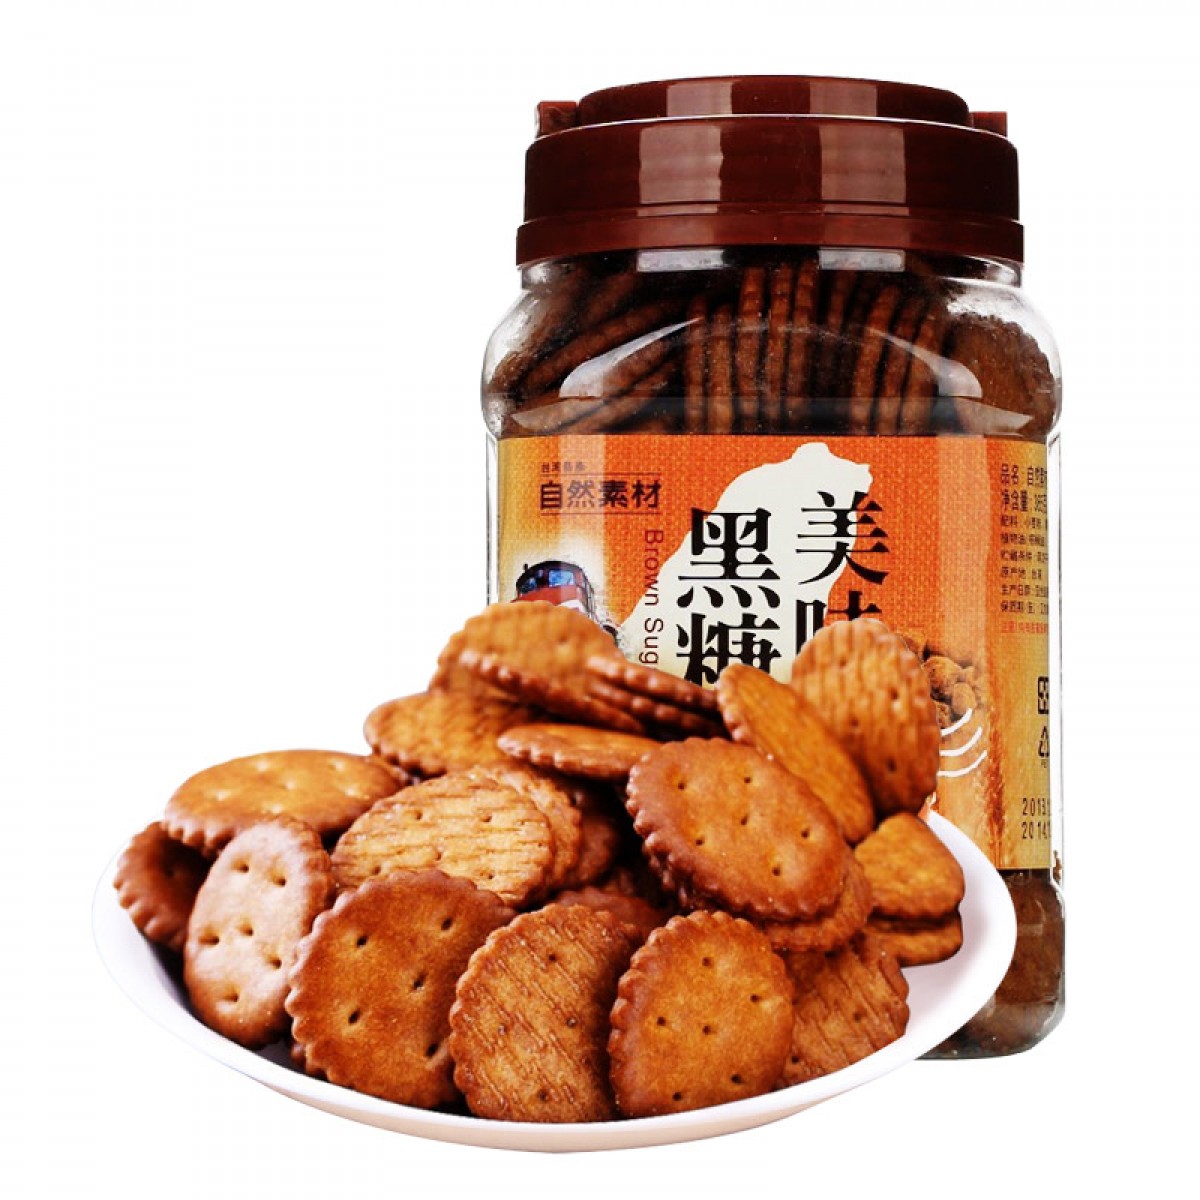 Taiwan imported natural material caramel and black sugar biscuit breakfast substitute biscuit office snack 365g